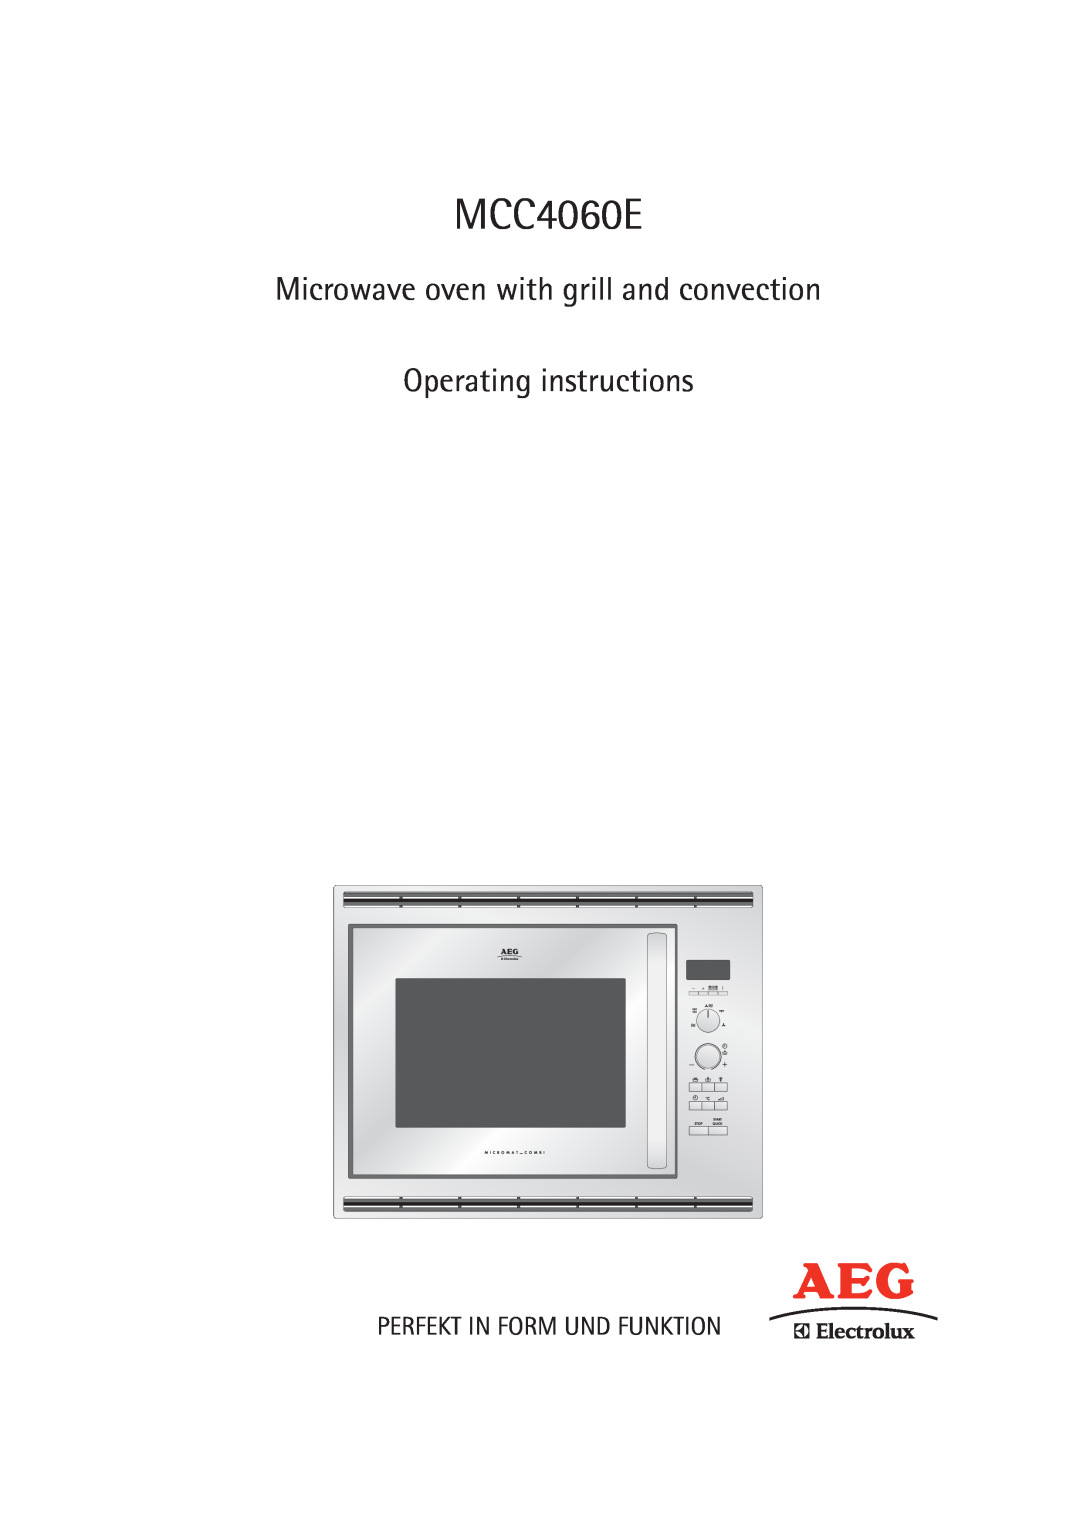 Electrolux MCC4060E operating instructions Microwave oven with grill and convection Operating instructions 